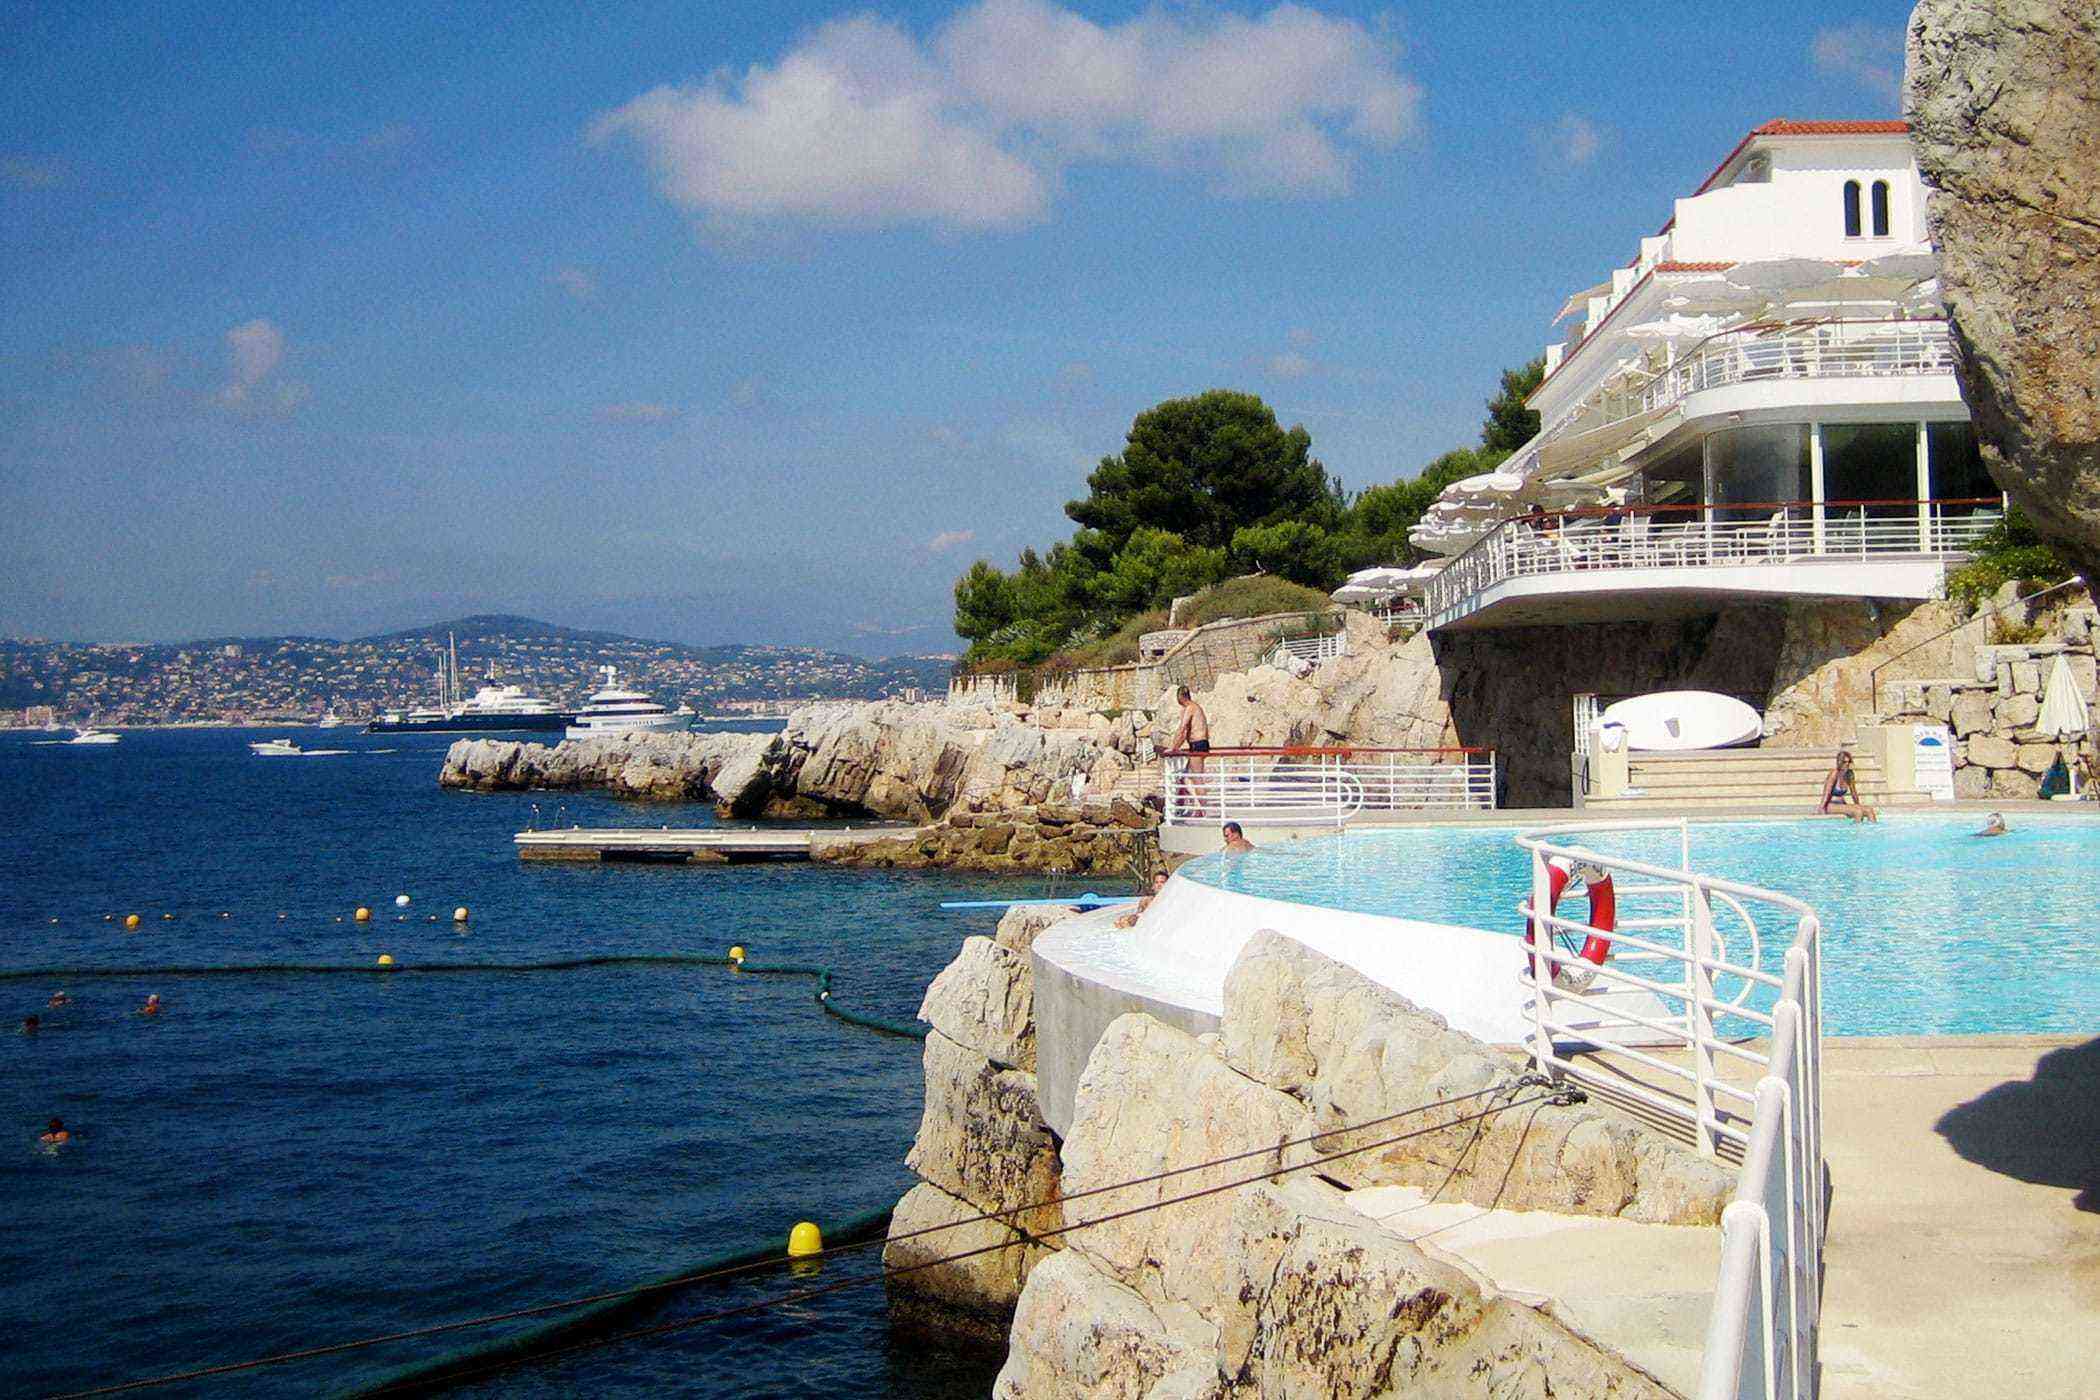 Pool With a View: 10 Scenic Spots to Swim Before Summer Ends – Fodors ...